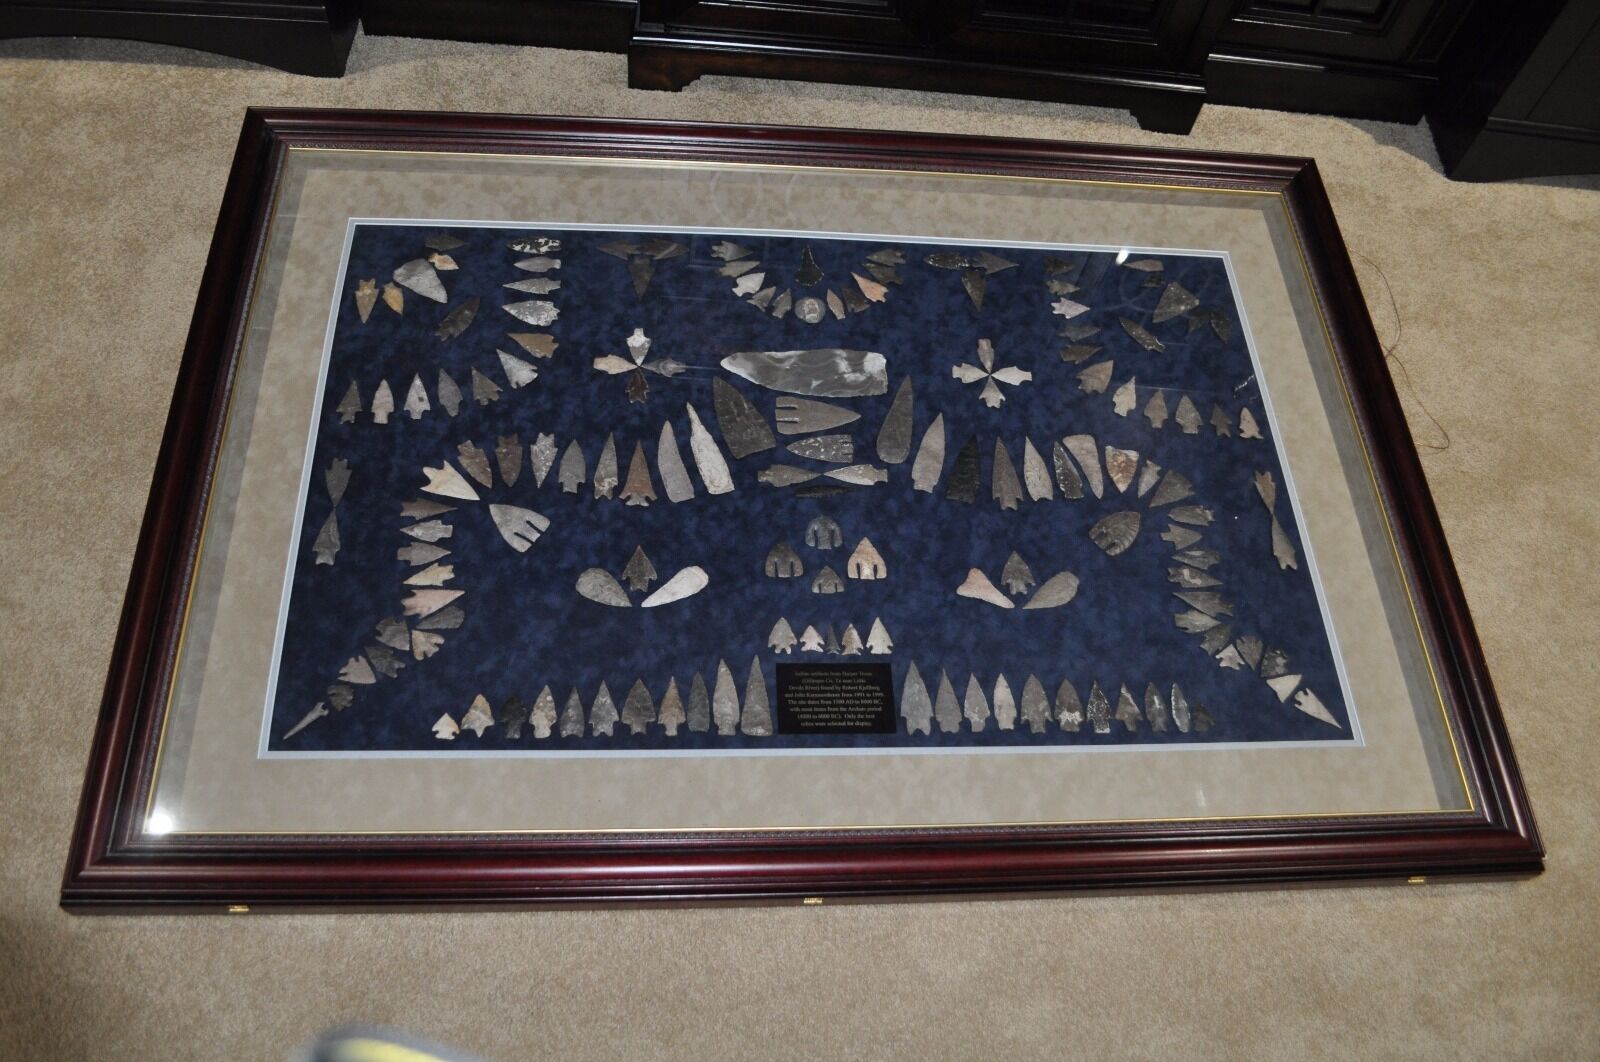  Large RARE American Texas Arrowheads Artifact framed collection Museum Quality